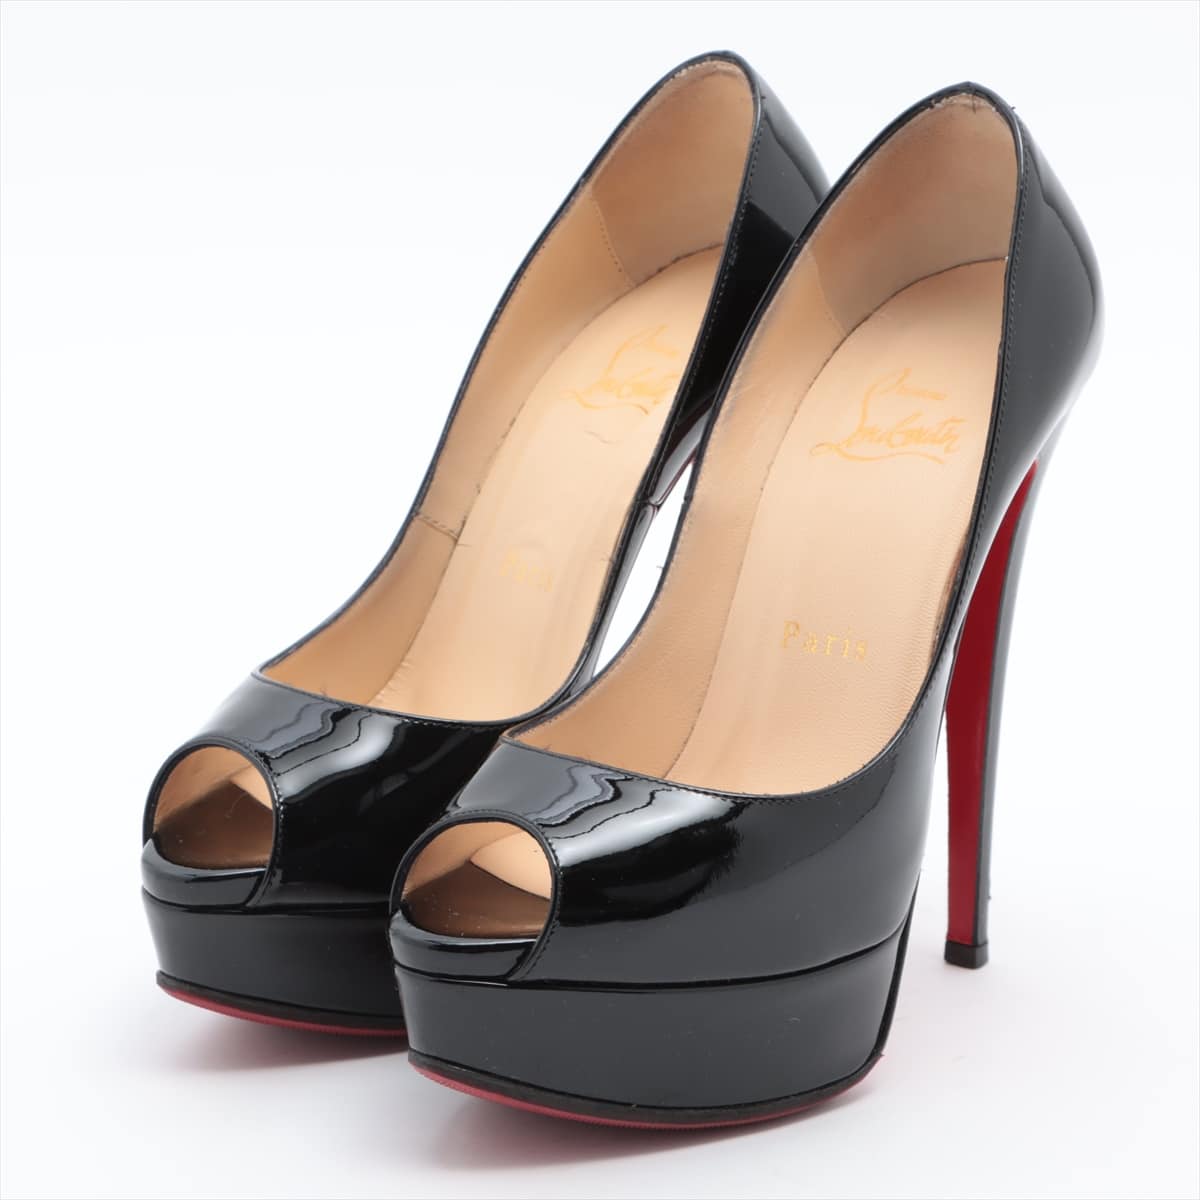 Christian Louboutin Patent leather Open-toe Pumps 35 1/2 Ladies' Black NEW VERY PRIVE